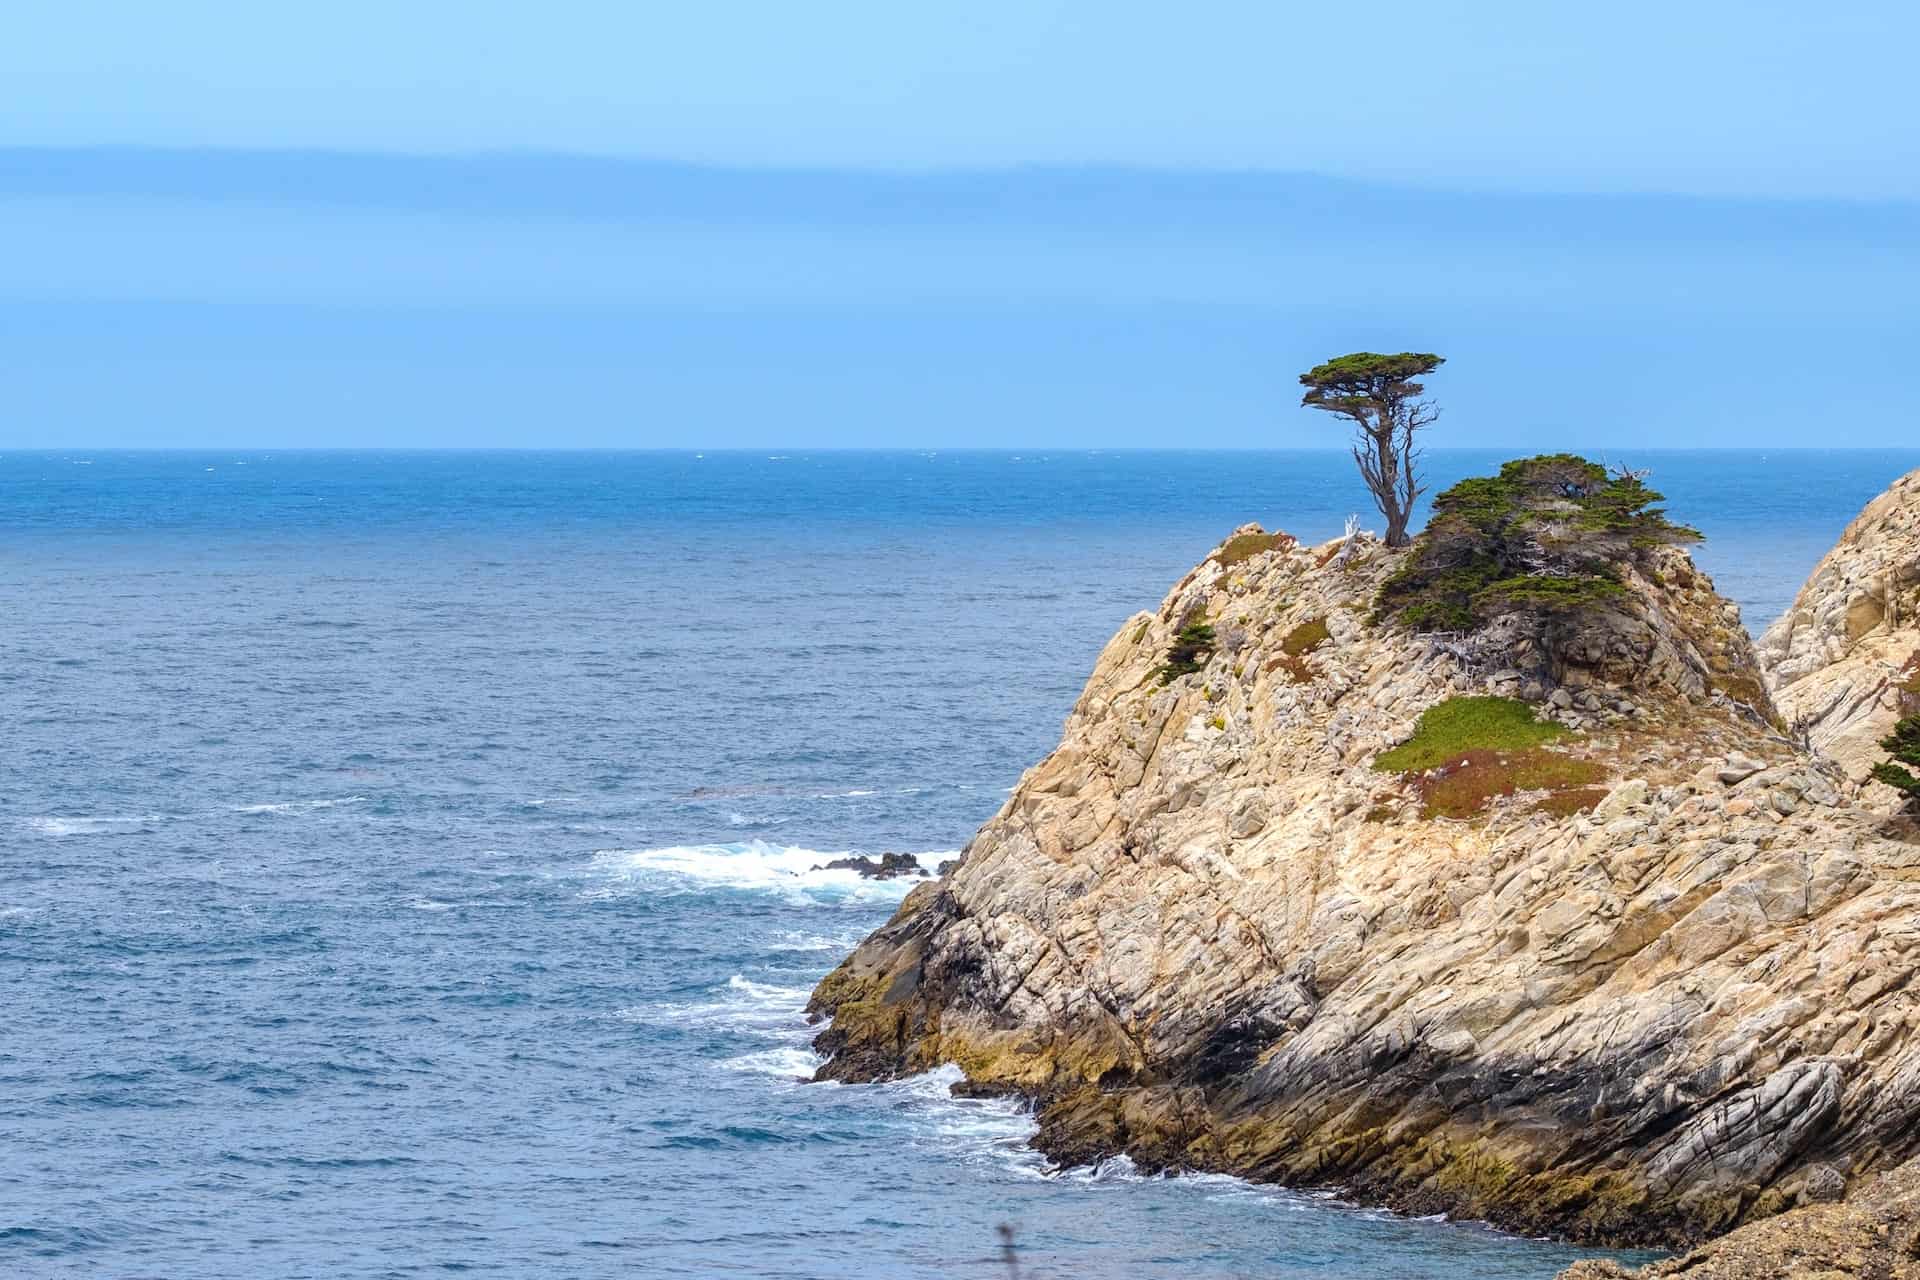 Lone cypress tree on the rocky shores of the rocky Pacific Coast in Northern California. Point Lobos Park